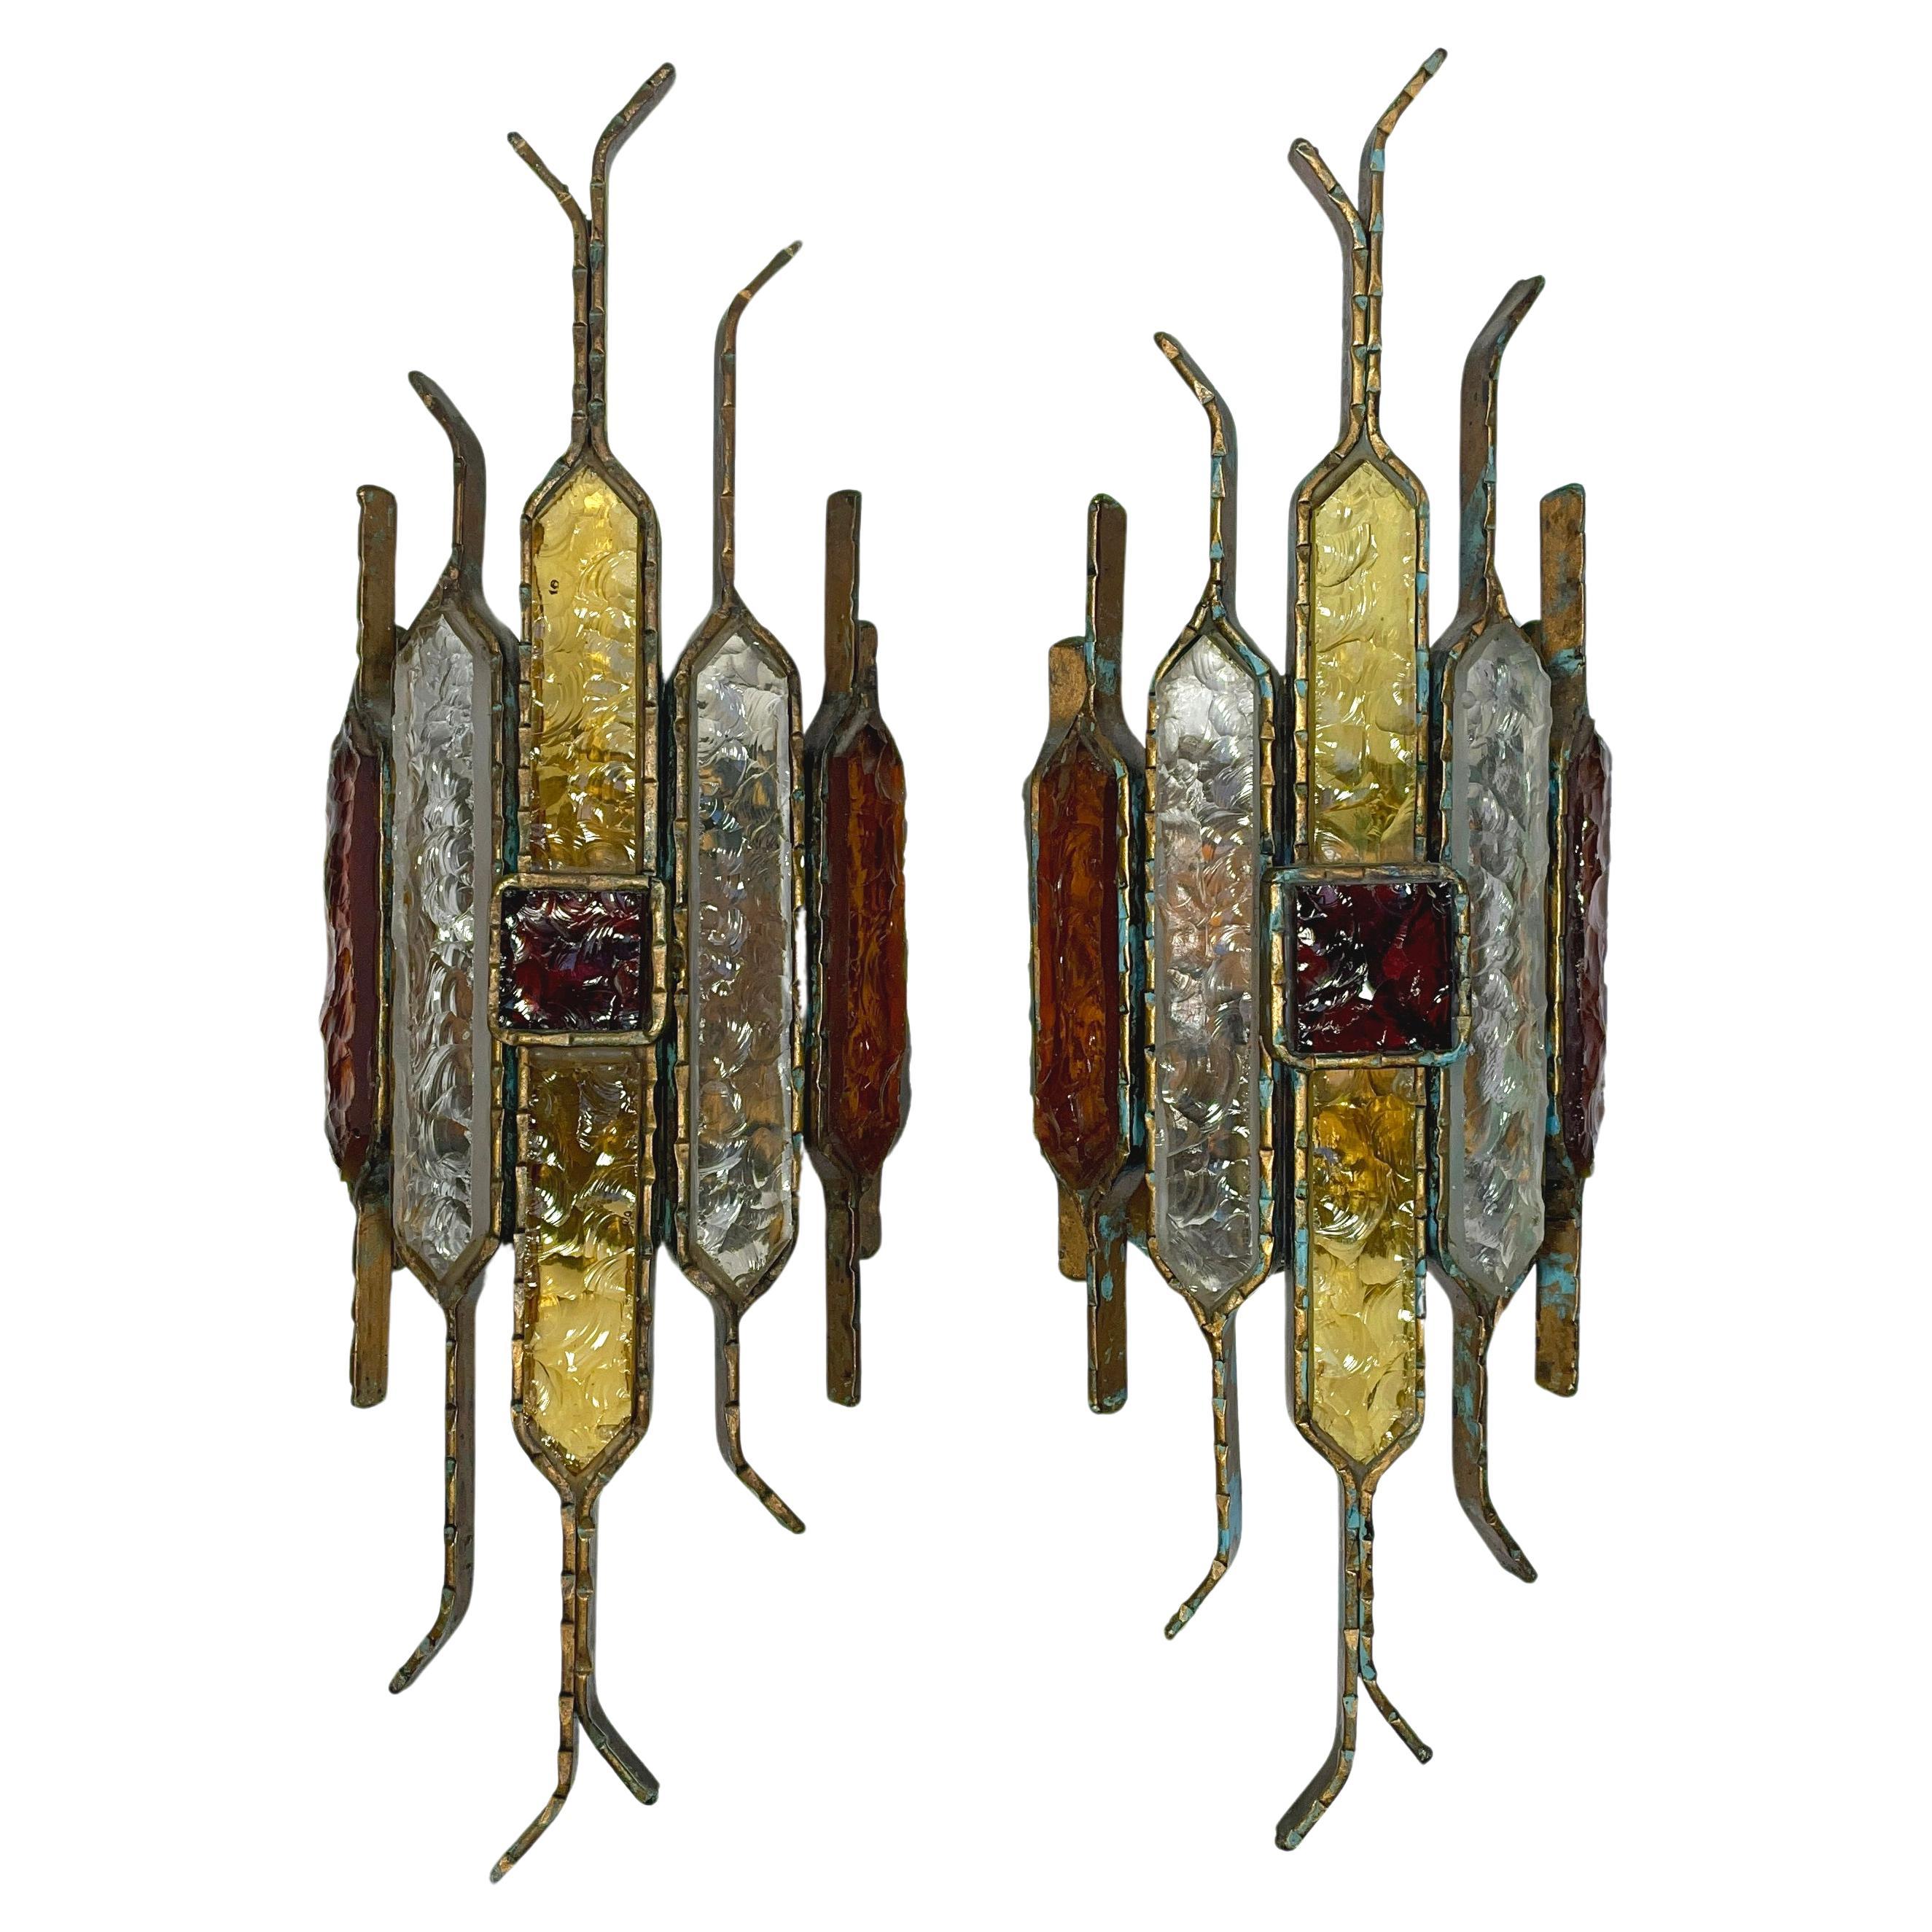 Beautiful 1970s Pair of Brutalist Hammered Glass Sconces by Longobard, Italy